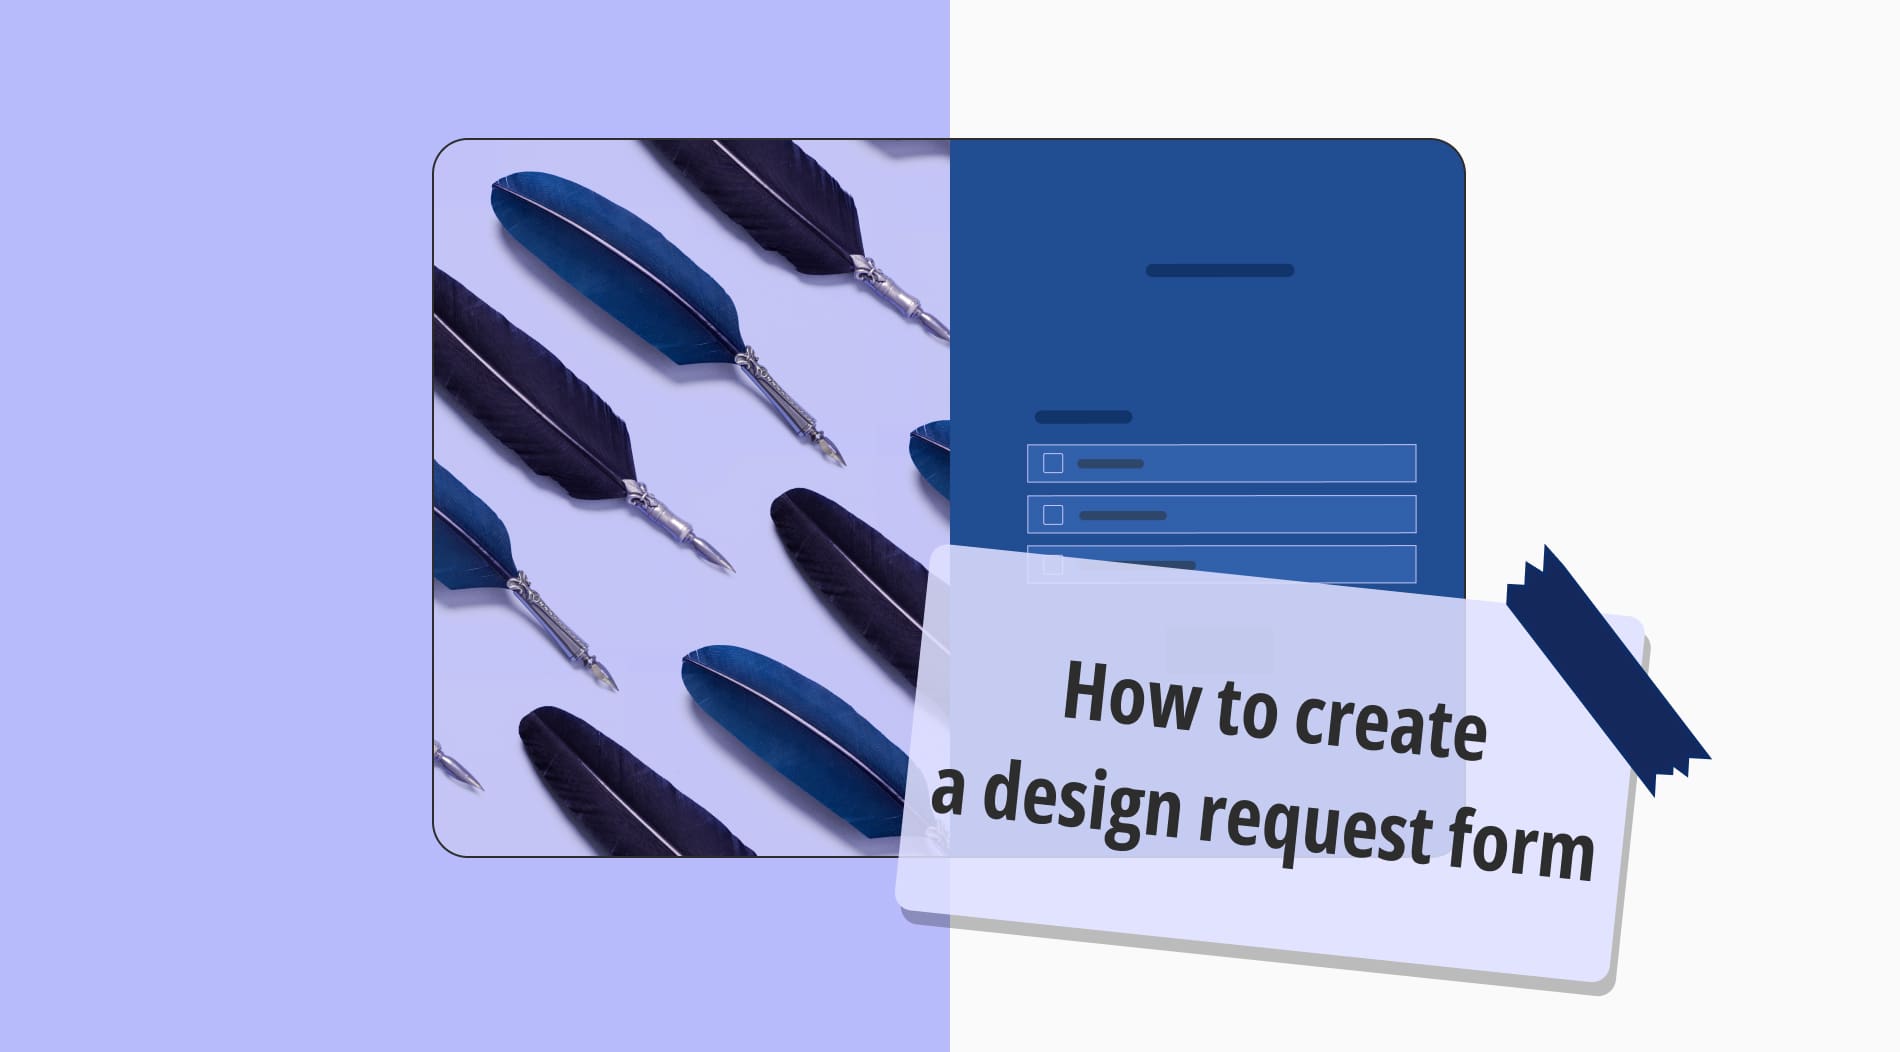 How to create a design request form (free templates & expert tips)